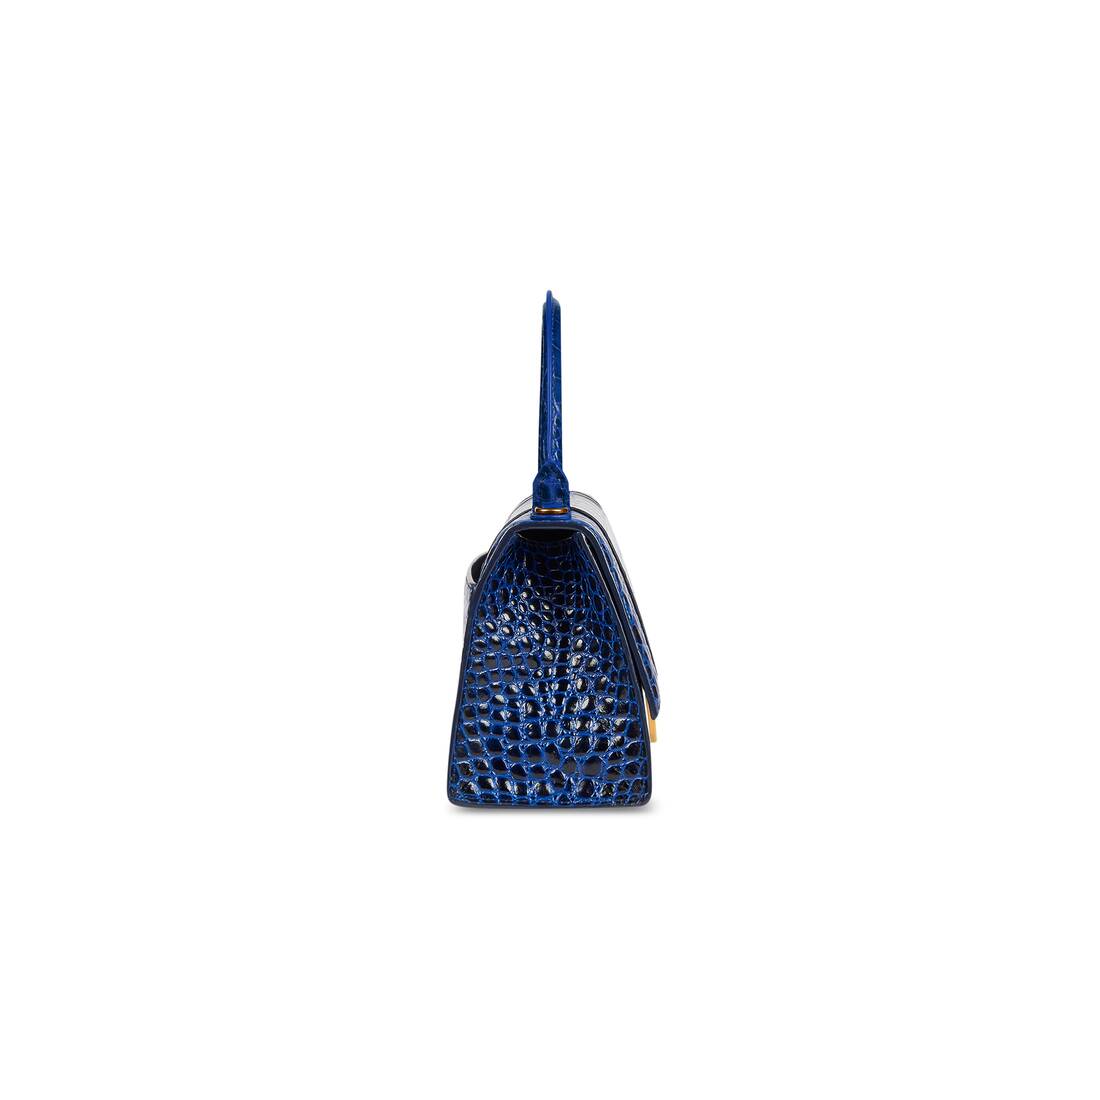 Luxury bag - Small Hourglass Graphity navy blue bag in crocodile-effect  leather